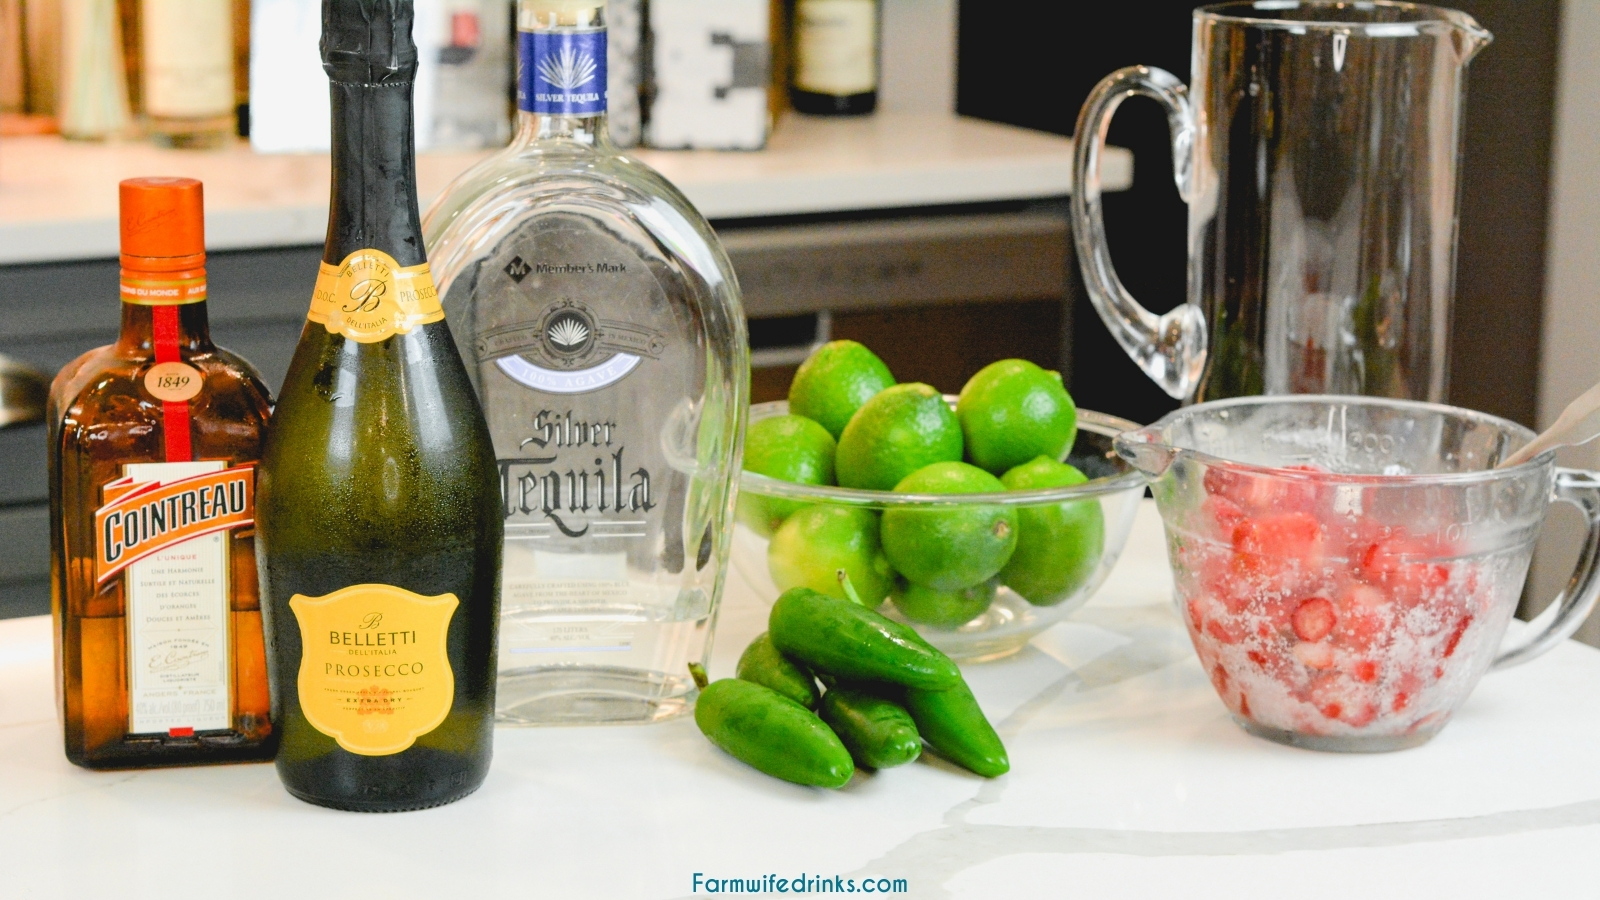 Champagne Margarita Ingredients - Tequila, champagne, cointreau, strawberries, limes, and jalapeños.